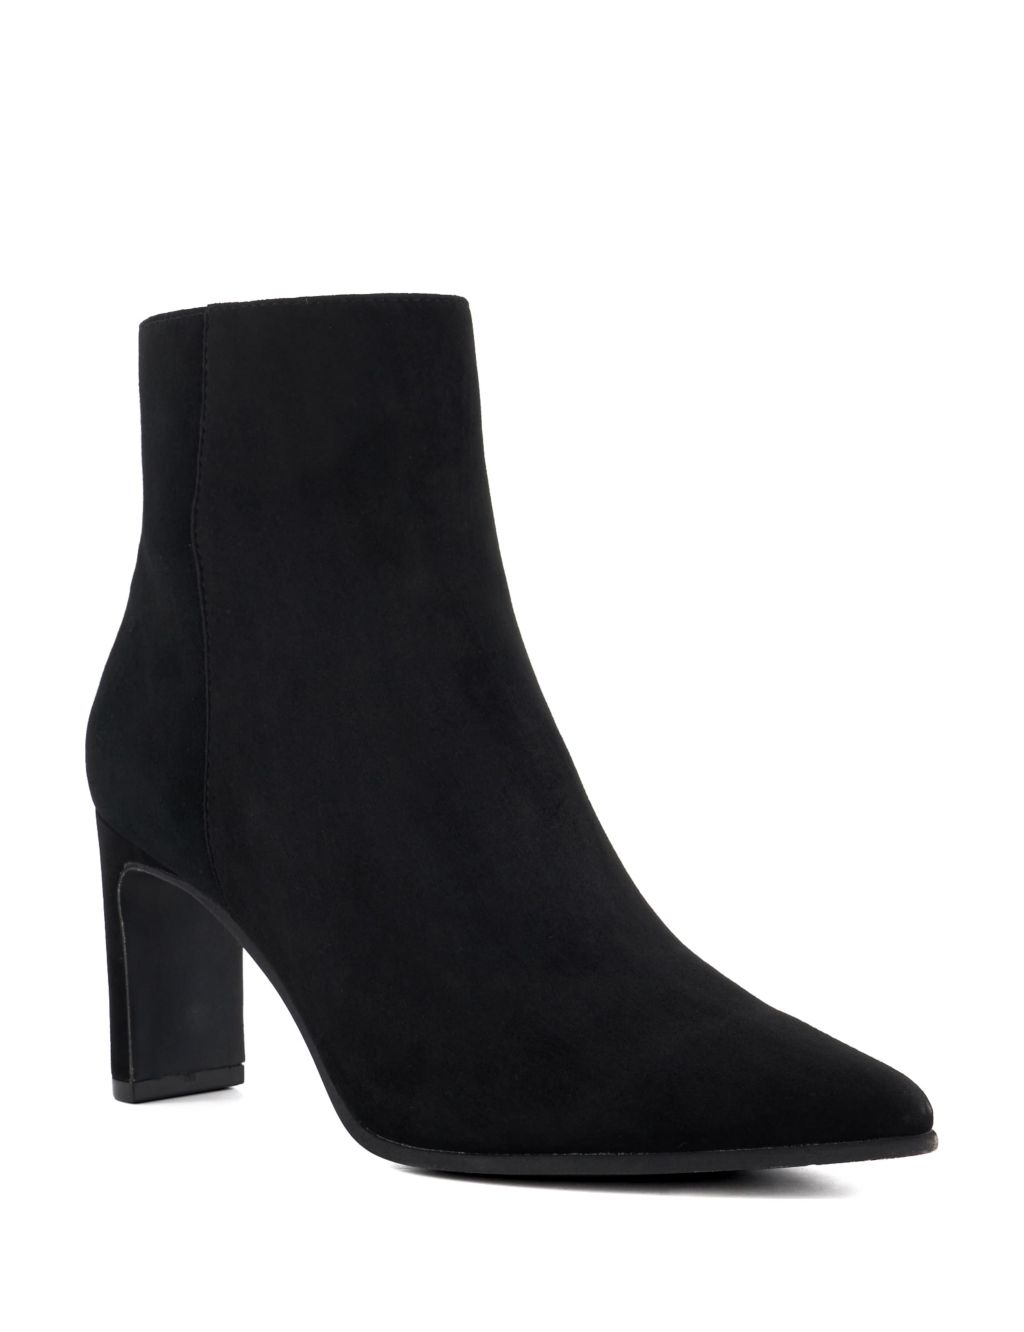 Suede Block Heel Pointed Ankle Boots | Dune London | M&S